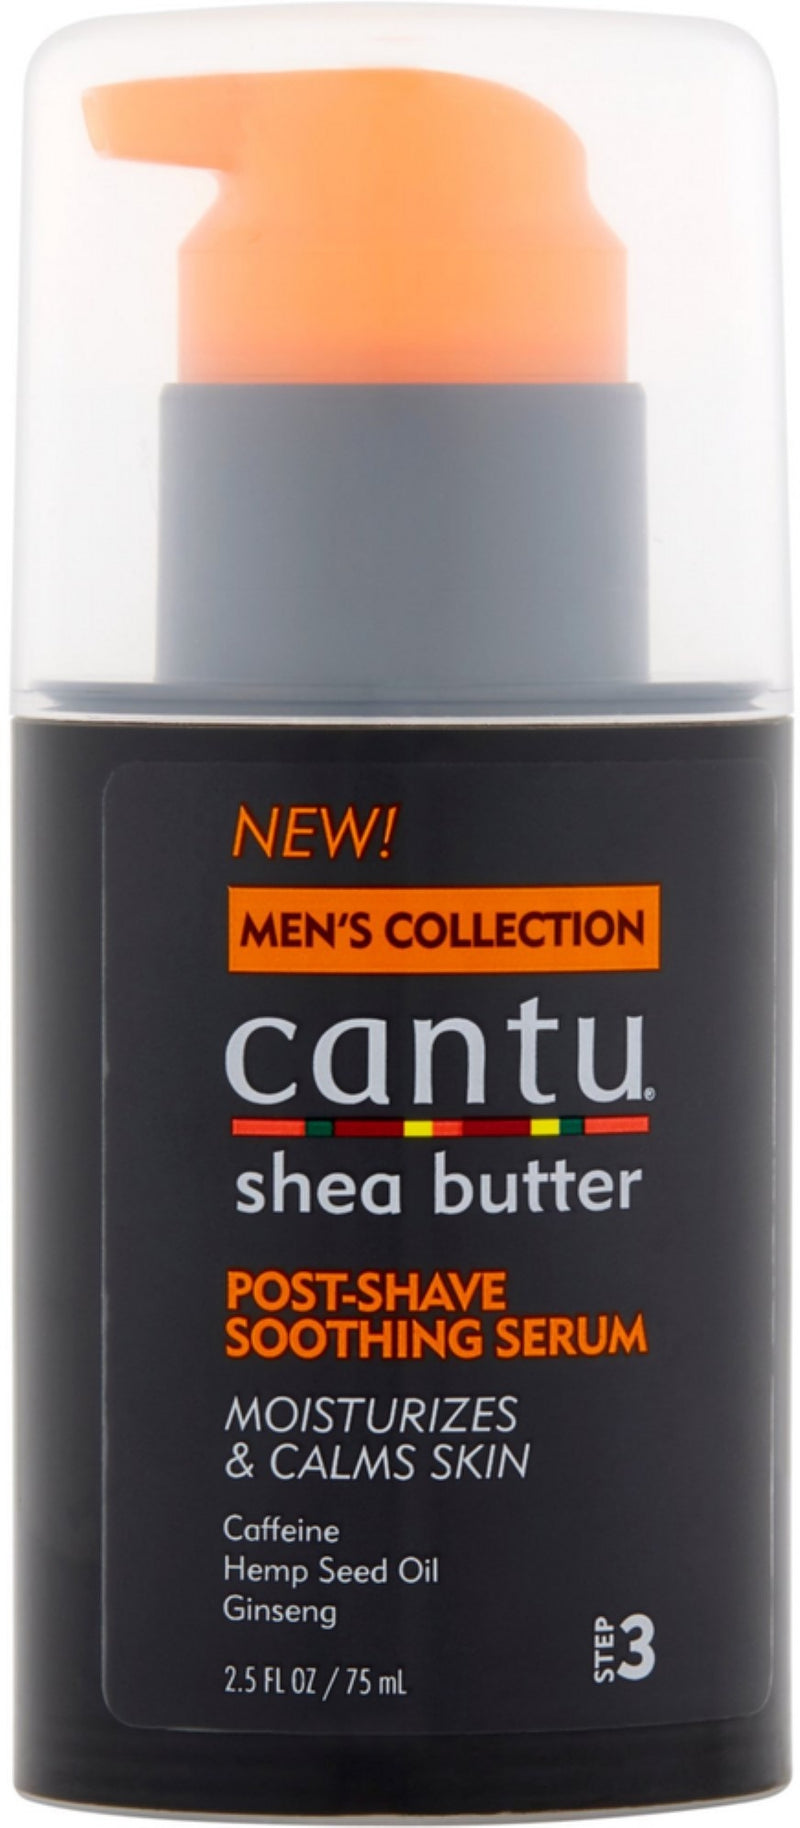 Cantu Men's Collection - Post-Shave Smoothing Serum 75ml